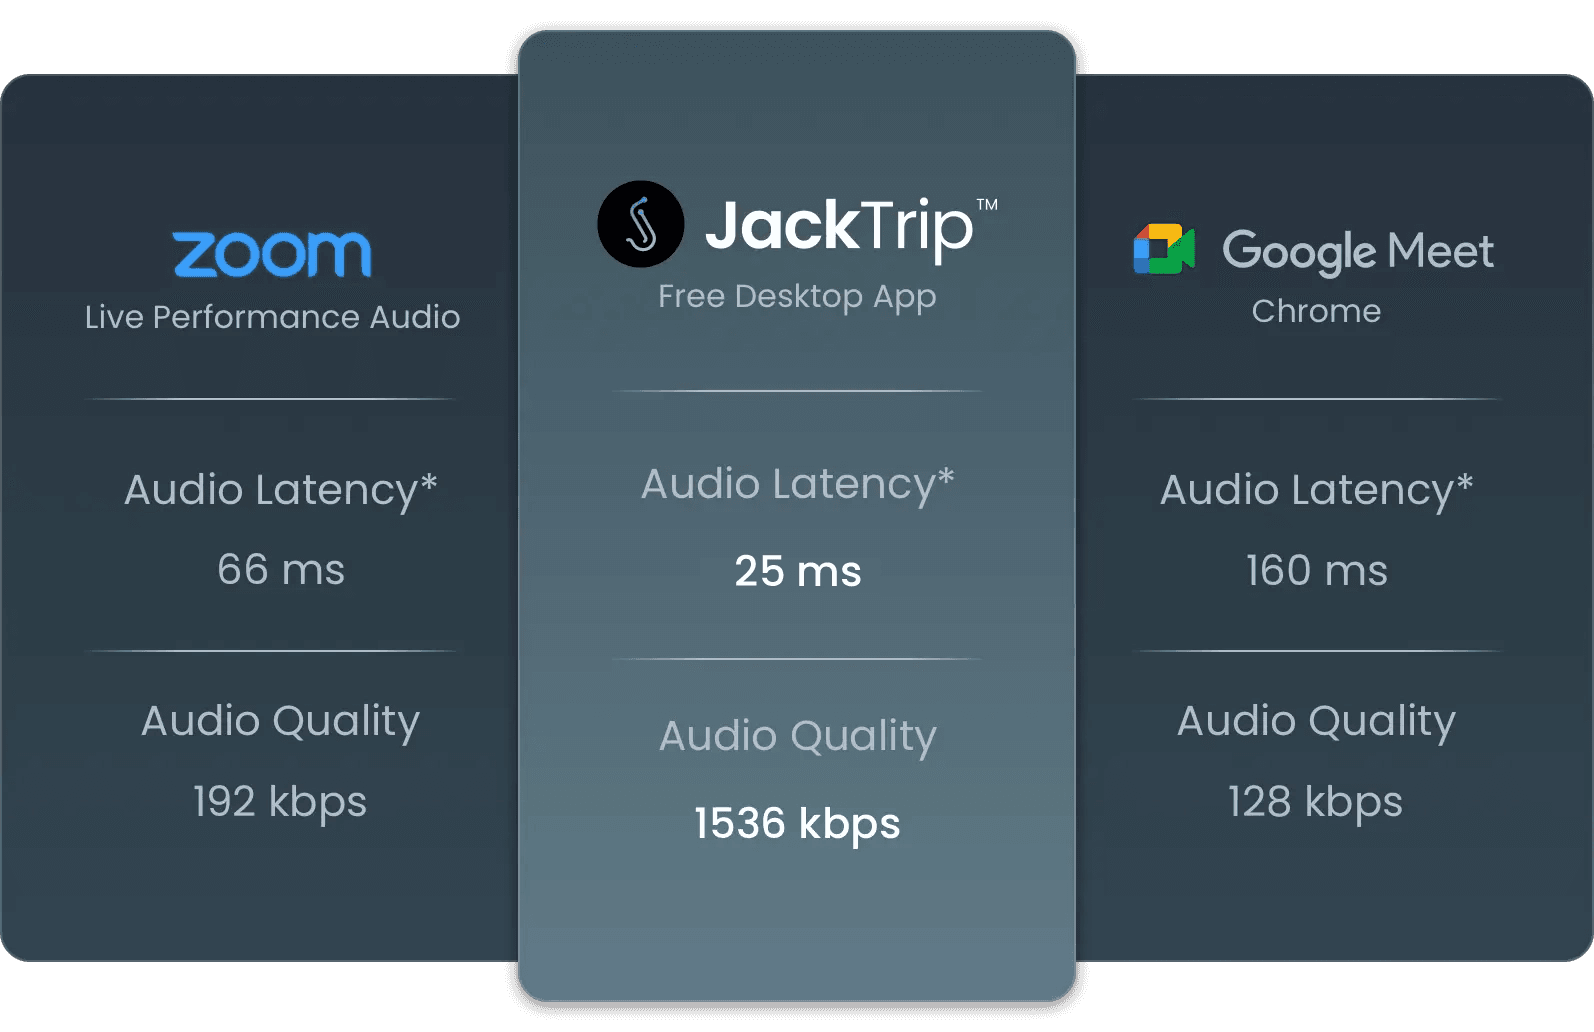 Product comparison between JackTrip, Zoom, and Google Meets